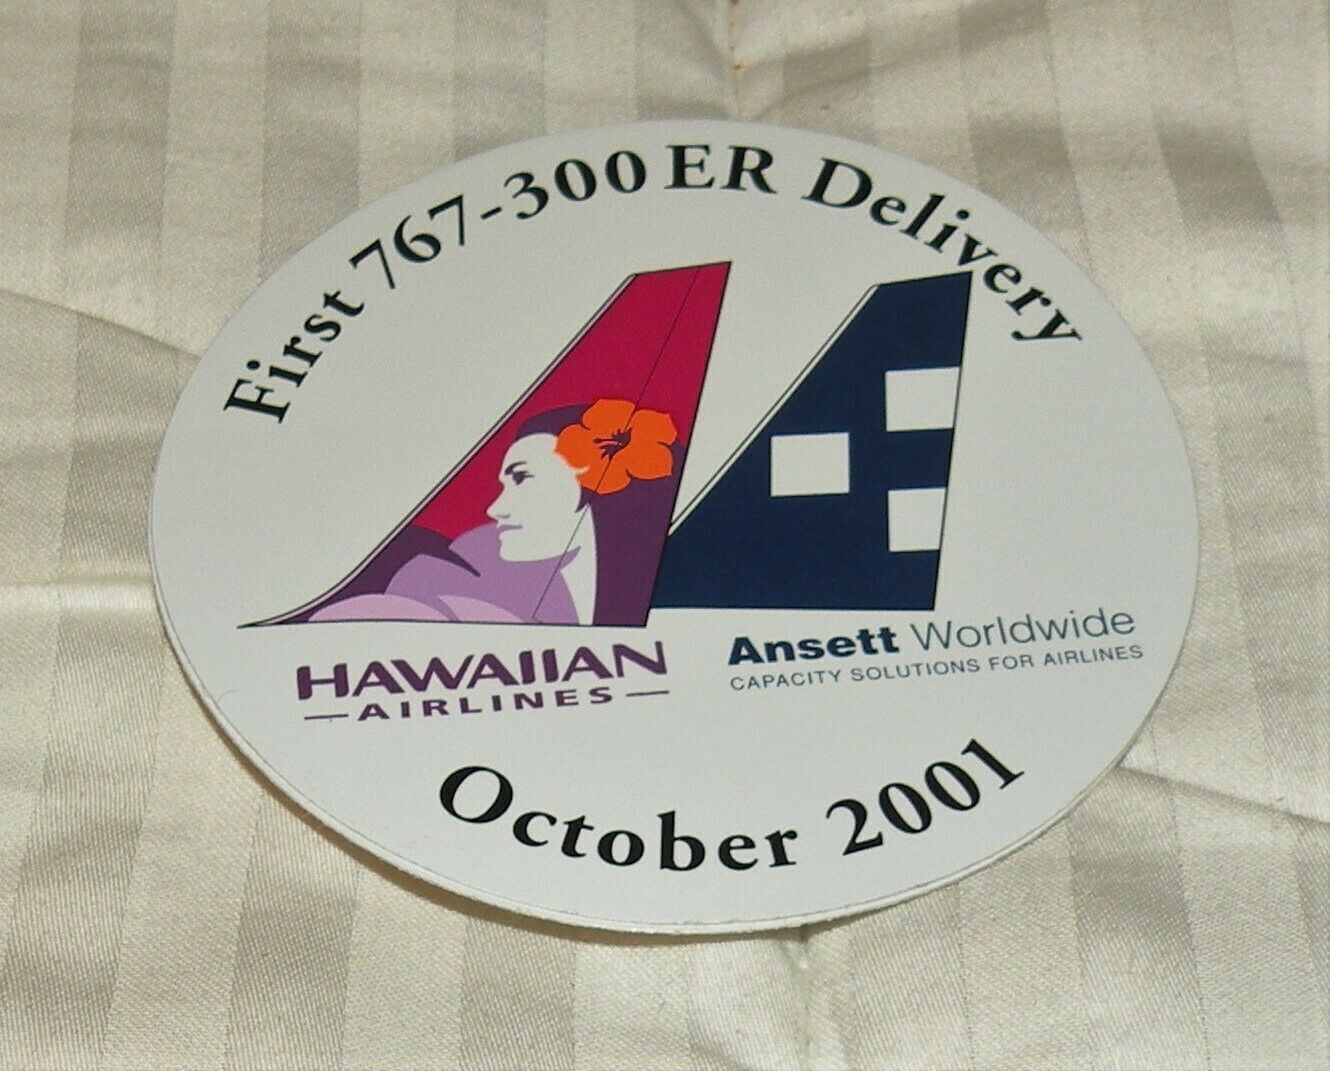 BOEING 767-300 ER DELIVERY ROUND STICKER HAWAIIAN ANSETT AIRLINES NEW